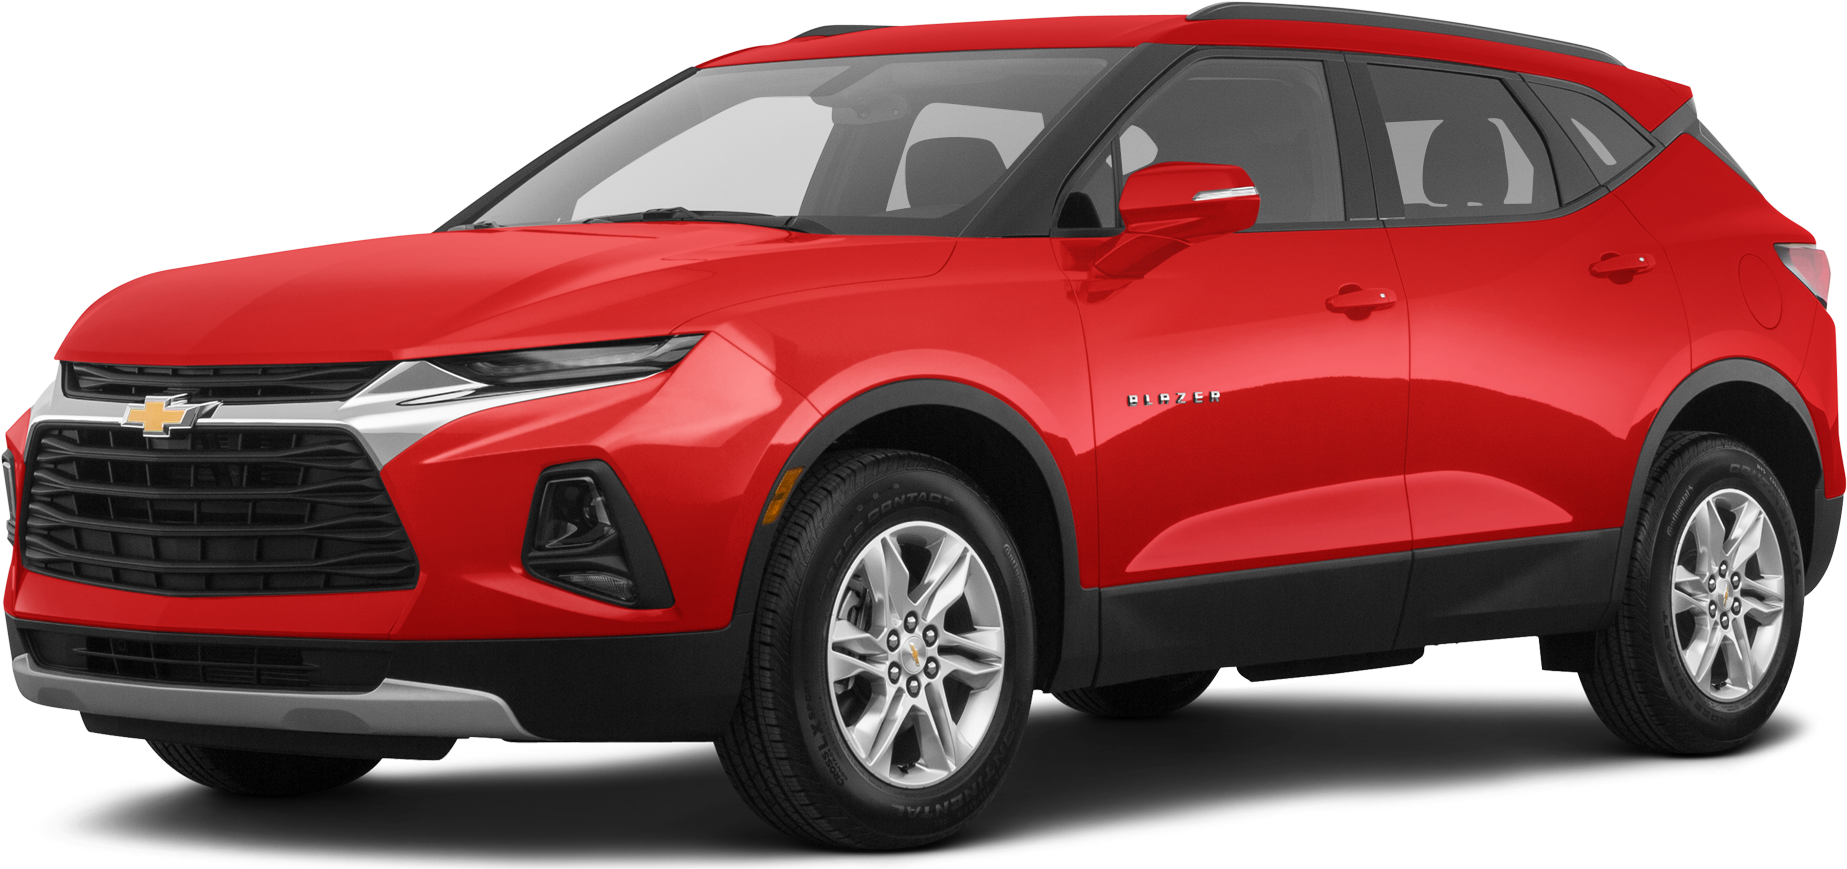 2020 Chevrolet Blazer Reviews Pricing And Specs Kelley Blue Book